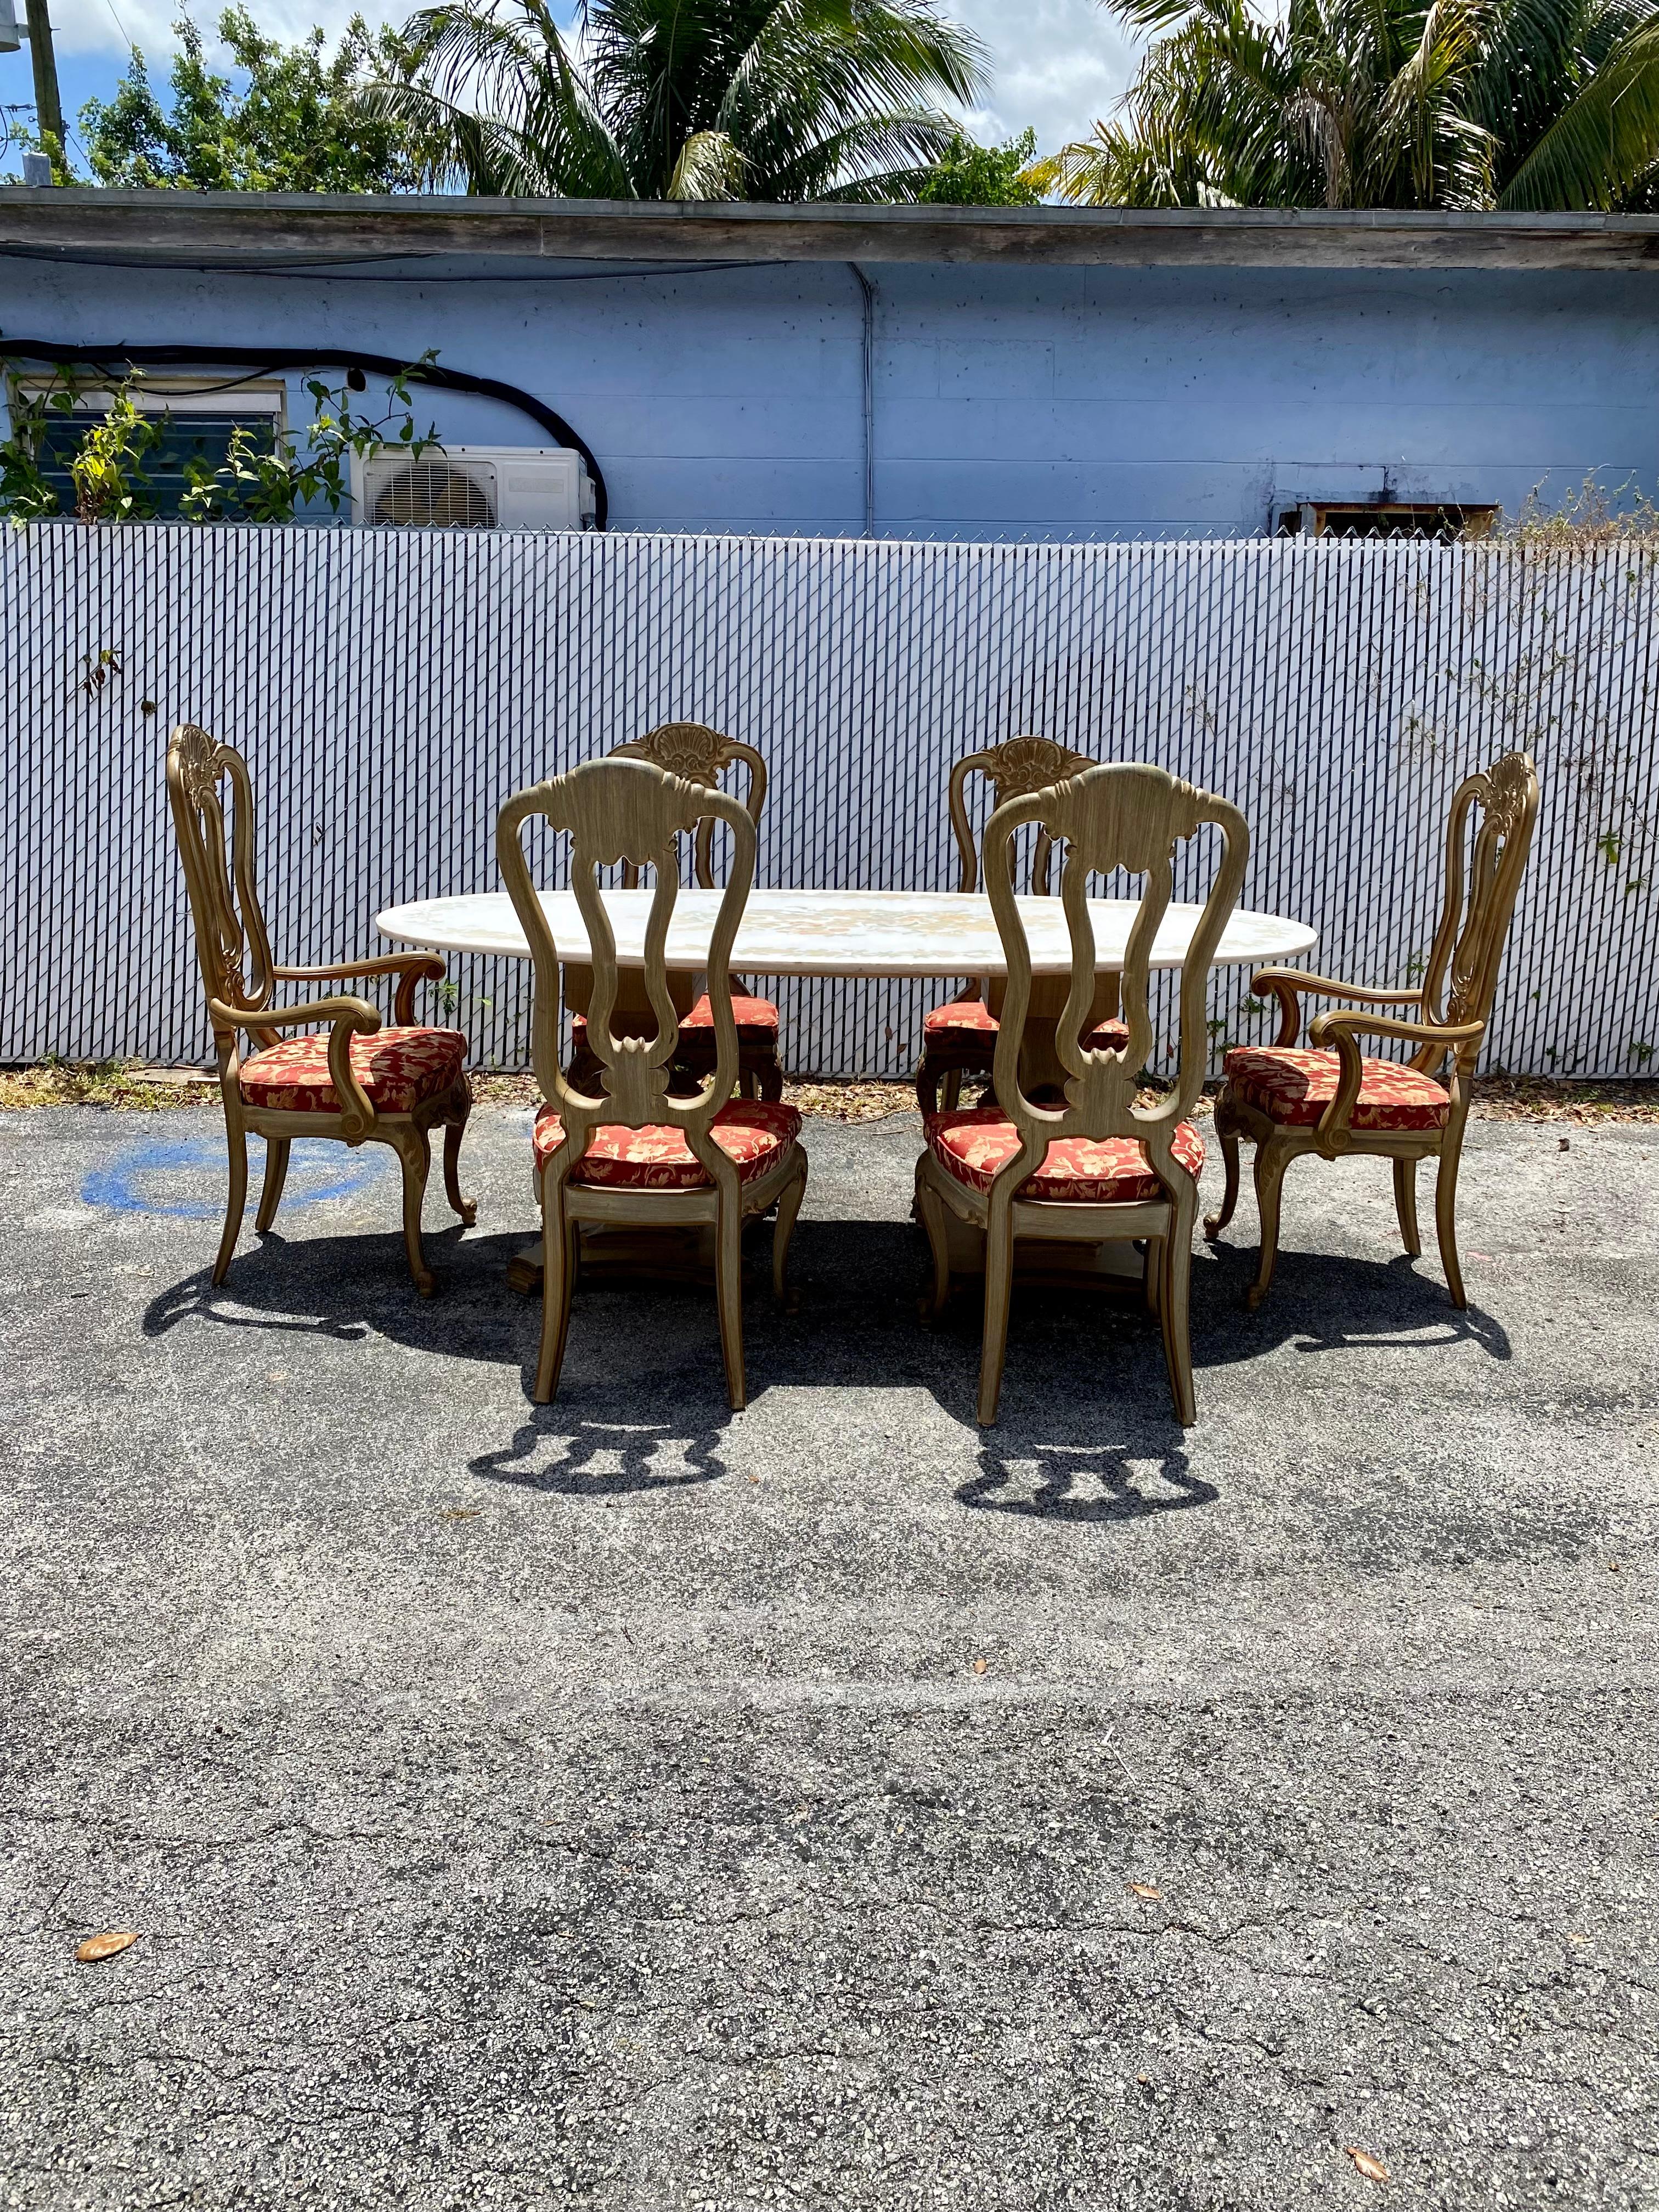 On offer on this occasion is one of the most stunning and rare, French Marble dining table and French Louis wood chairs set you could hope to find. In its original condition. No restoration. Outstanding design is exhibited throughout. The beautiful